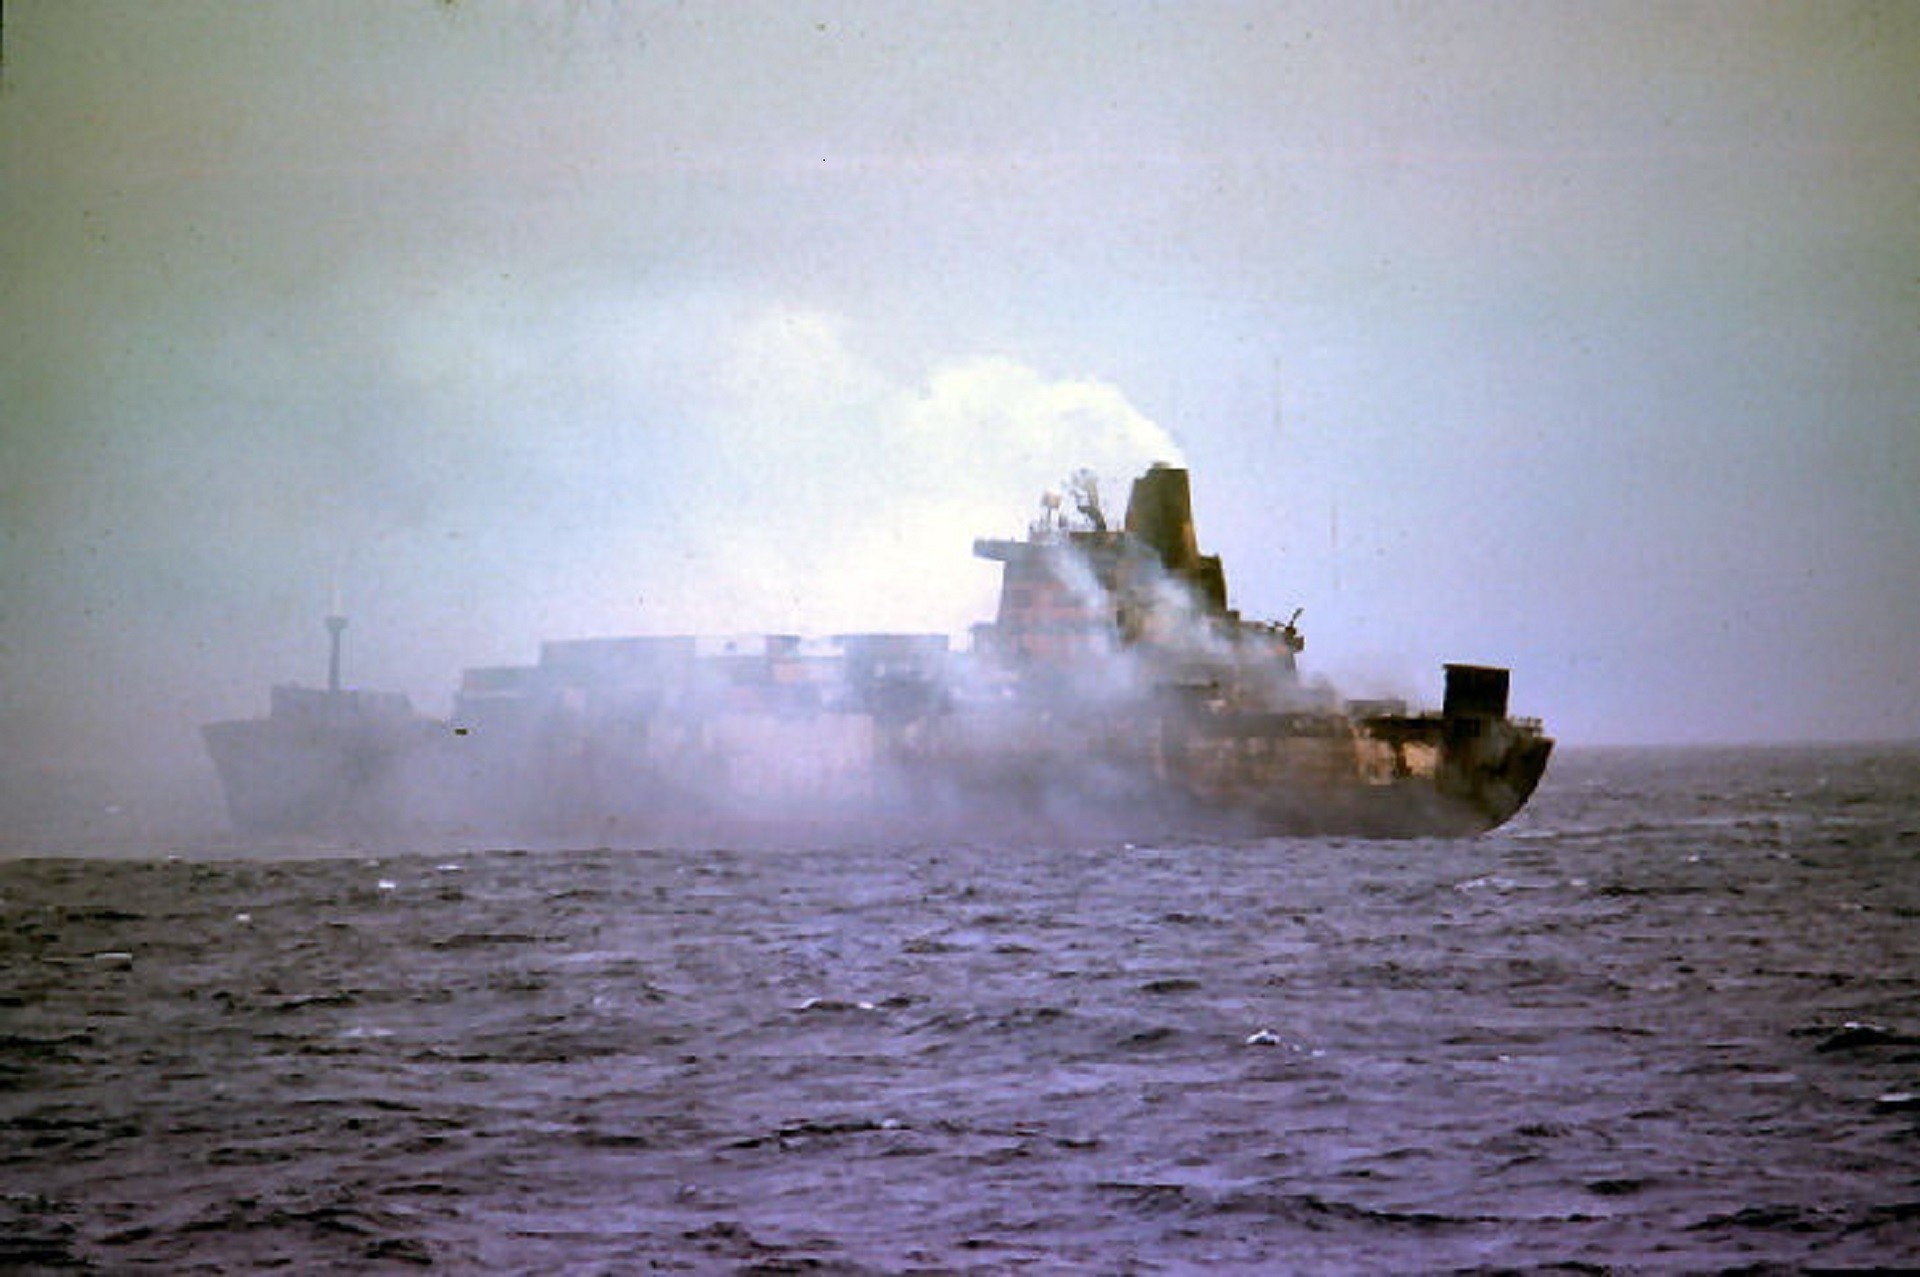 The Atlantic Conveyor after being hit by missiles.